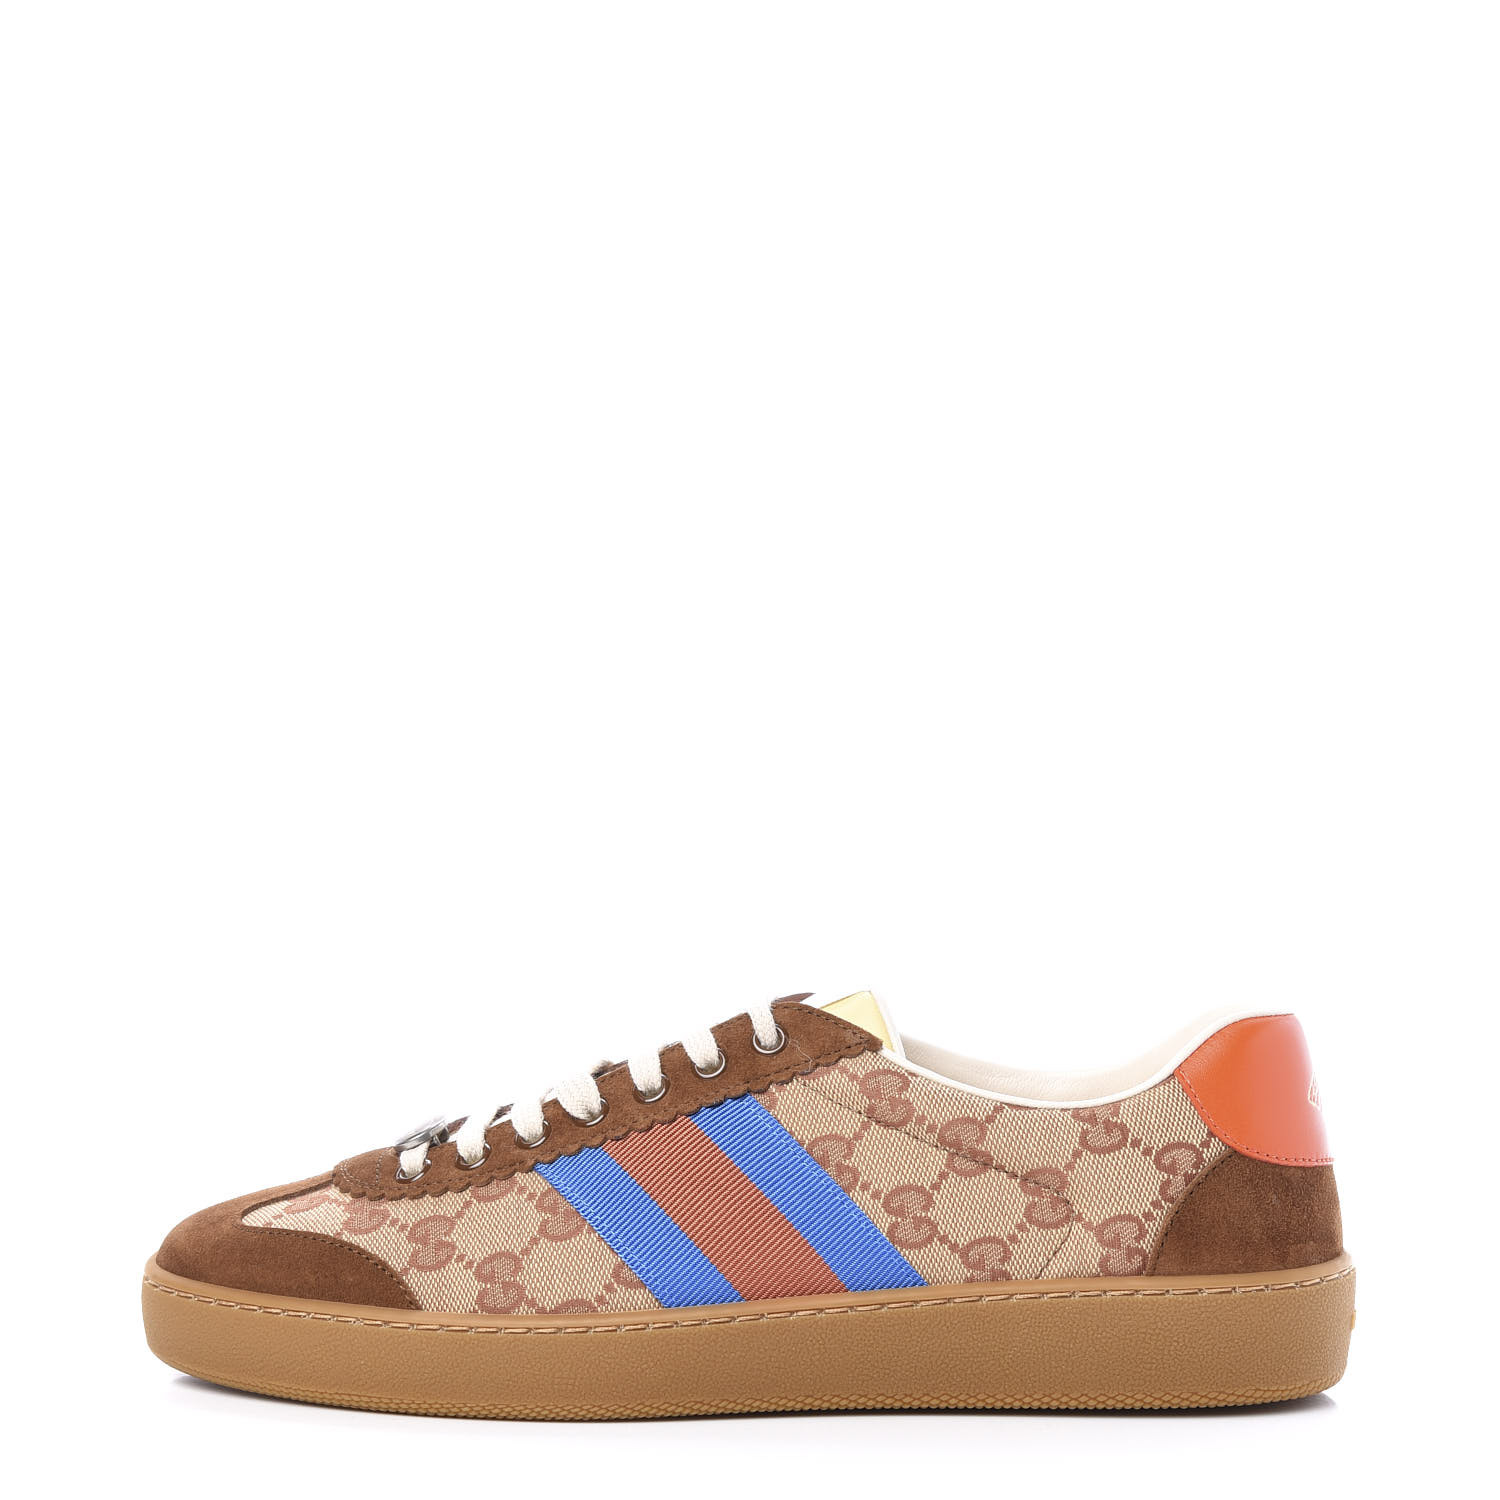 gucci mens sneakers blue